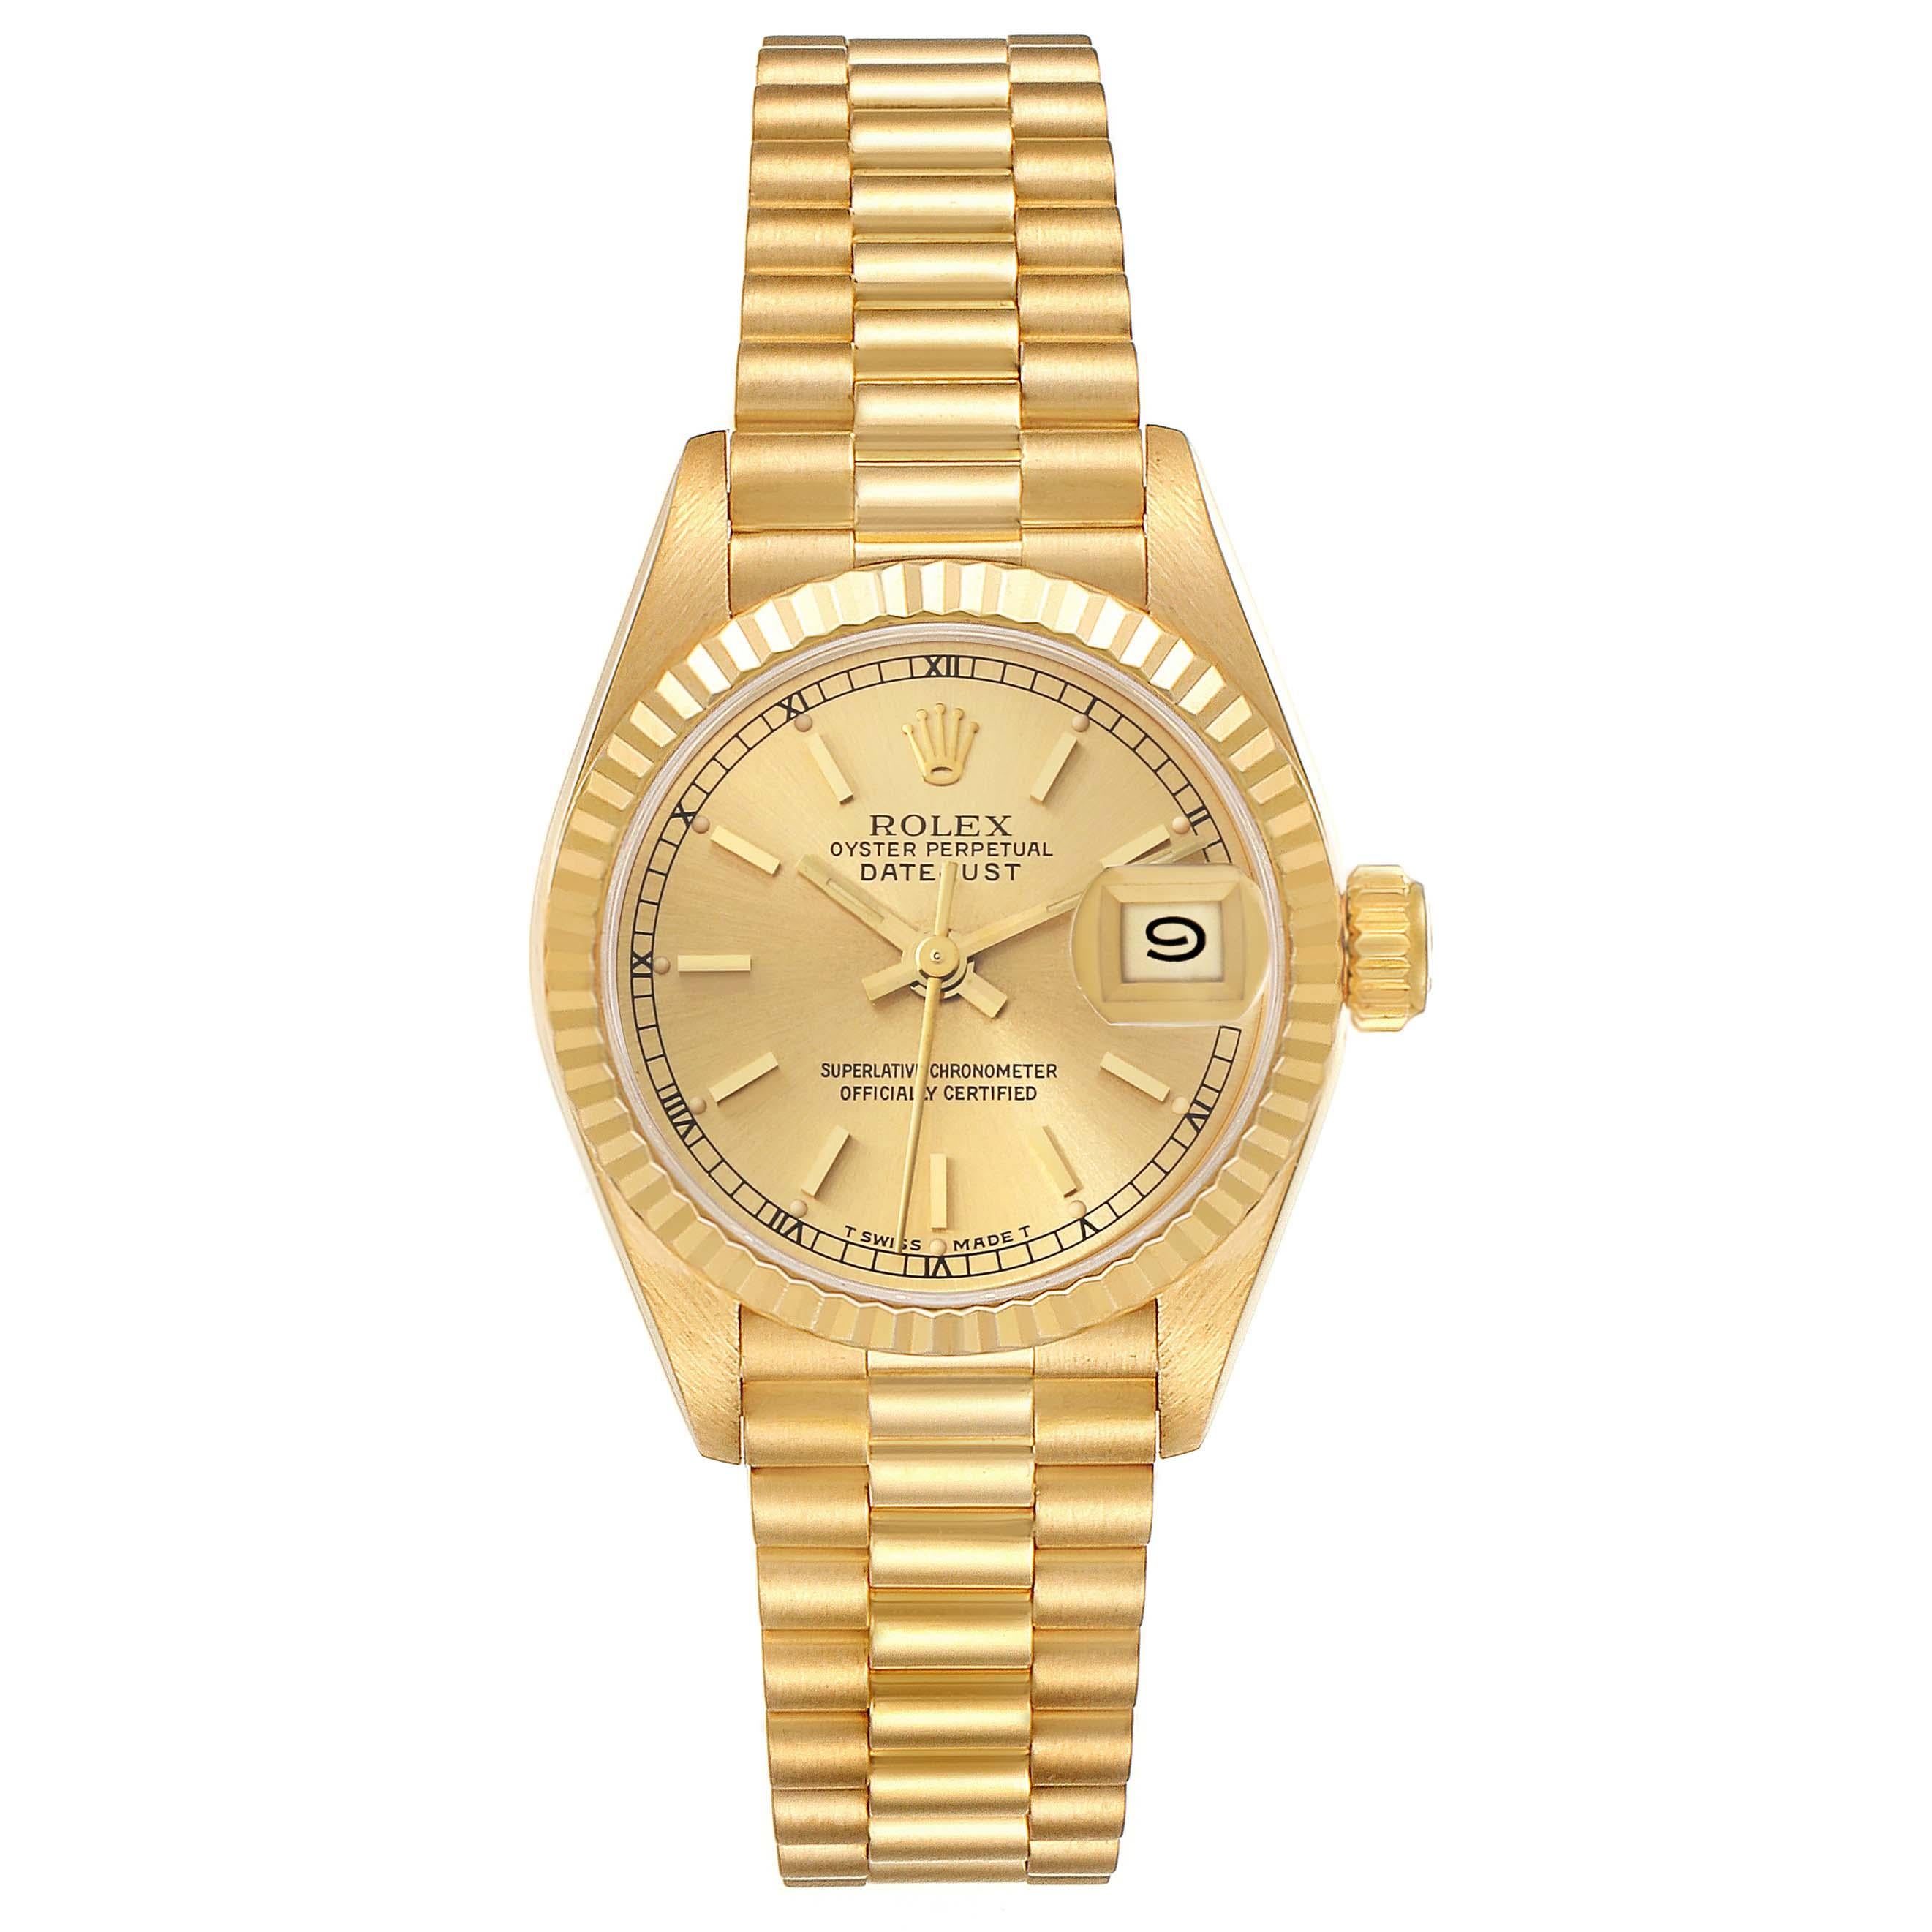 Rolex Datejust President Yellow Gold Ladies Watch 69178. Officially certified chronometer automatic self-winding movement. 18k yellow gold oyster case 26.0 mm in diameter. Rolex logo on the crown. 18k yellow gold fluted bezel. Scratch resistant